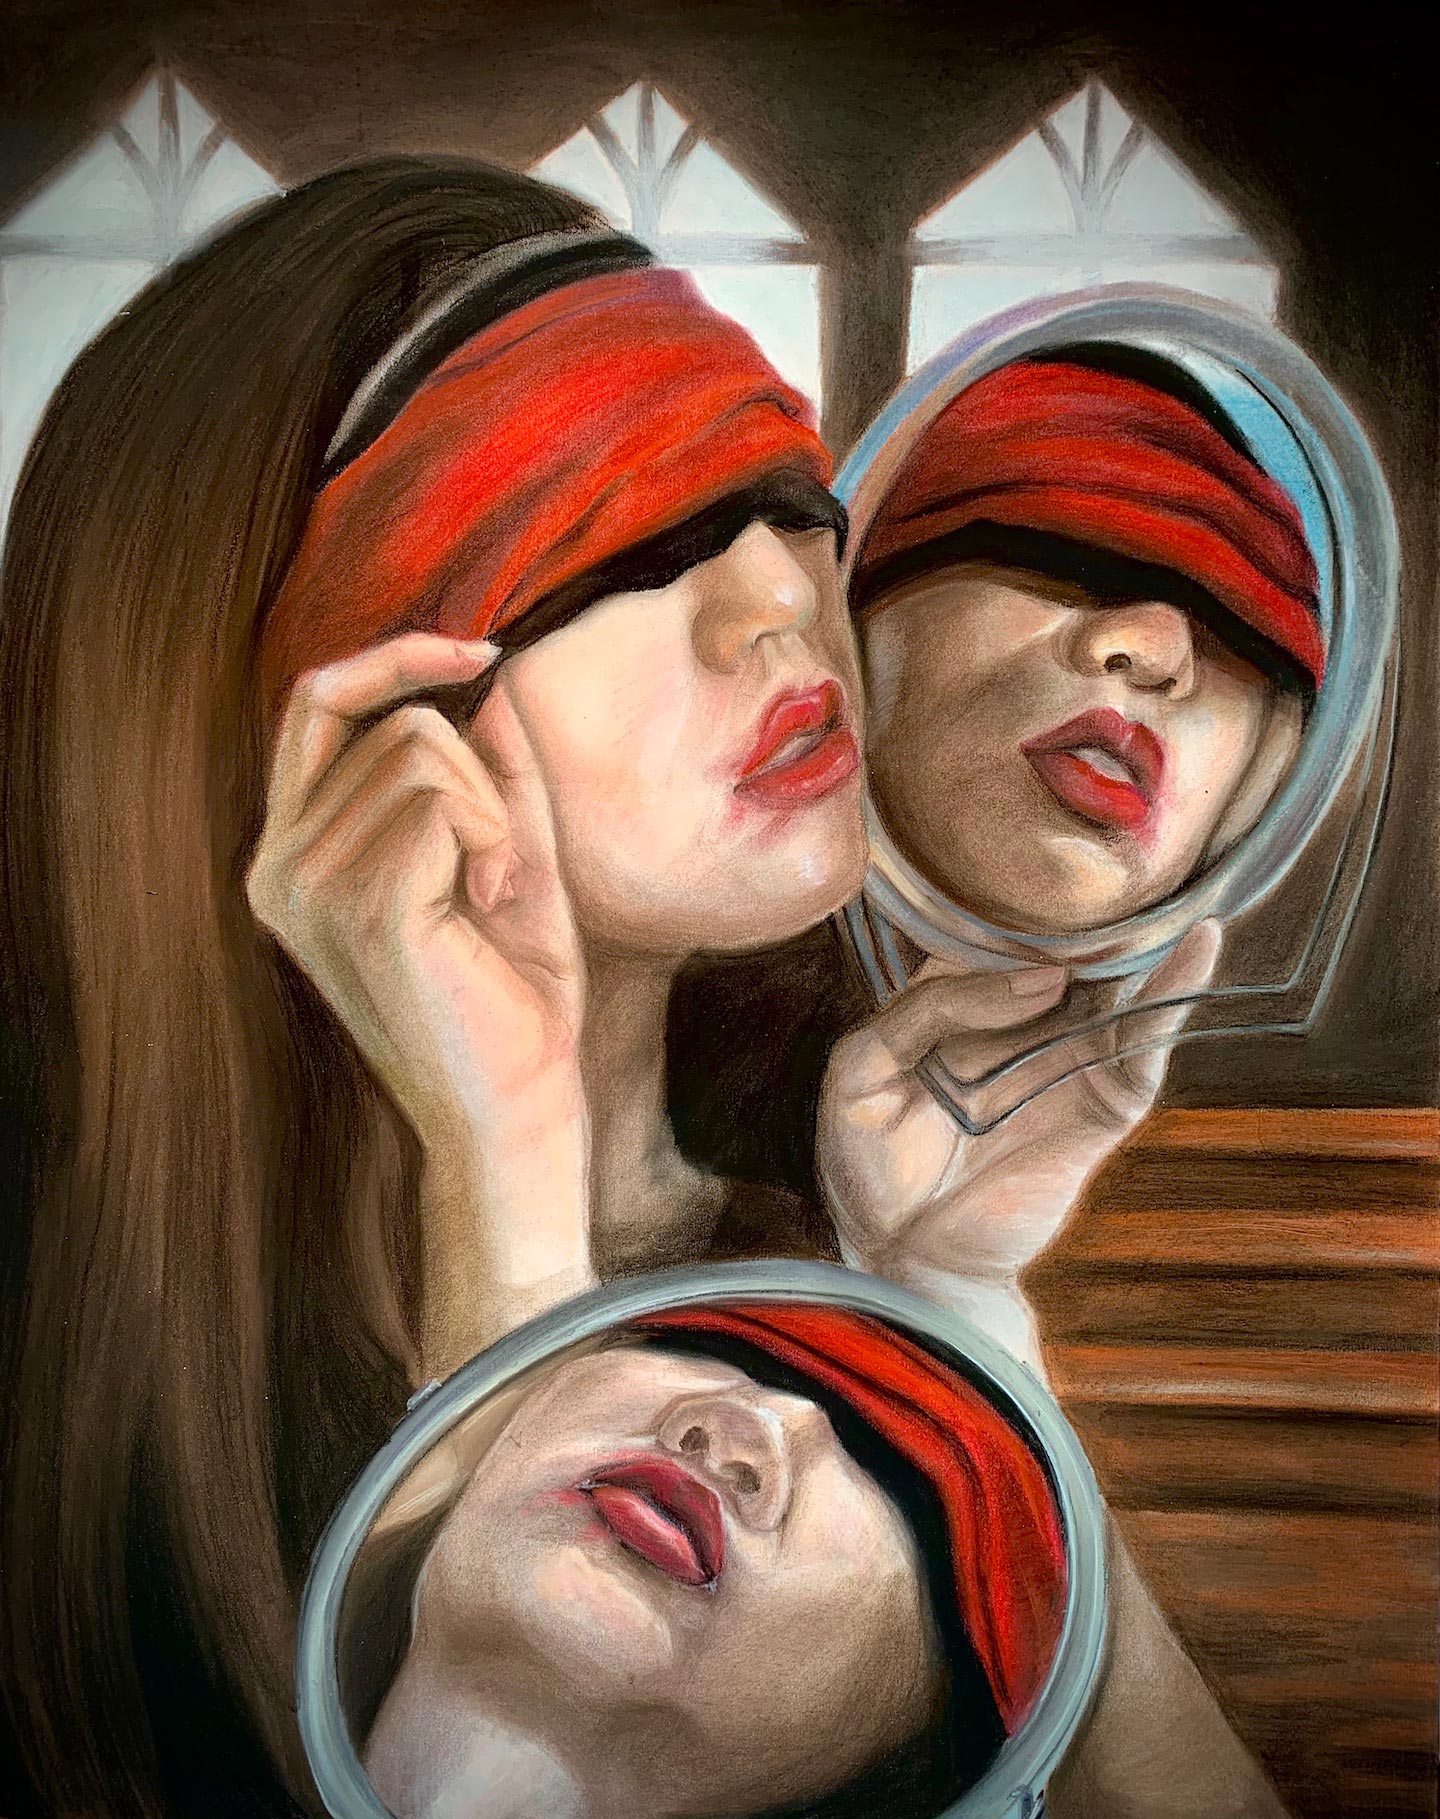 A woman in a red blindfold reflected in several mirrors